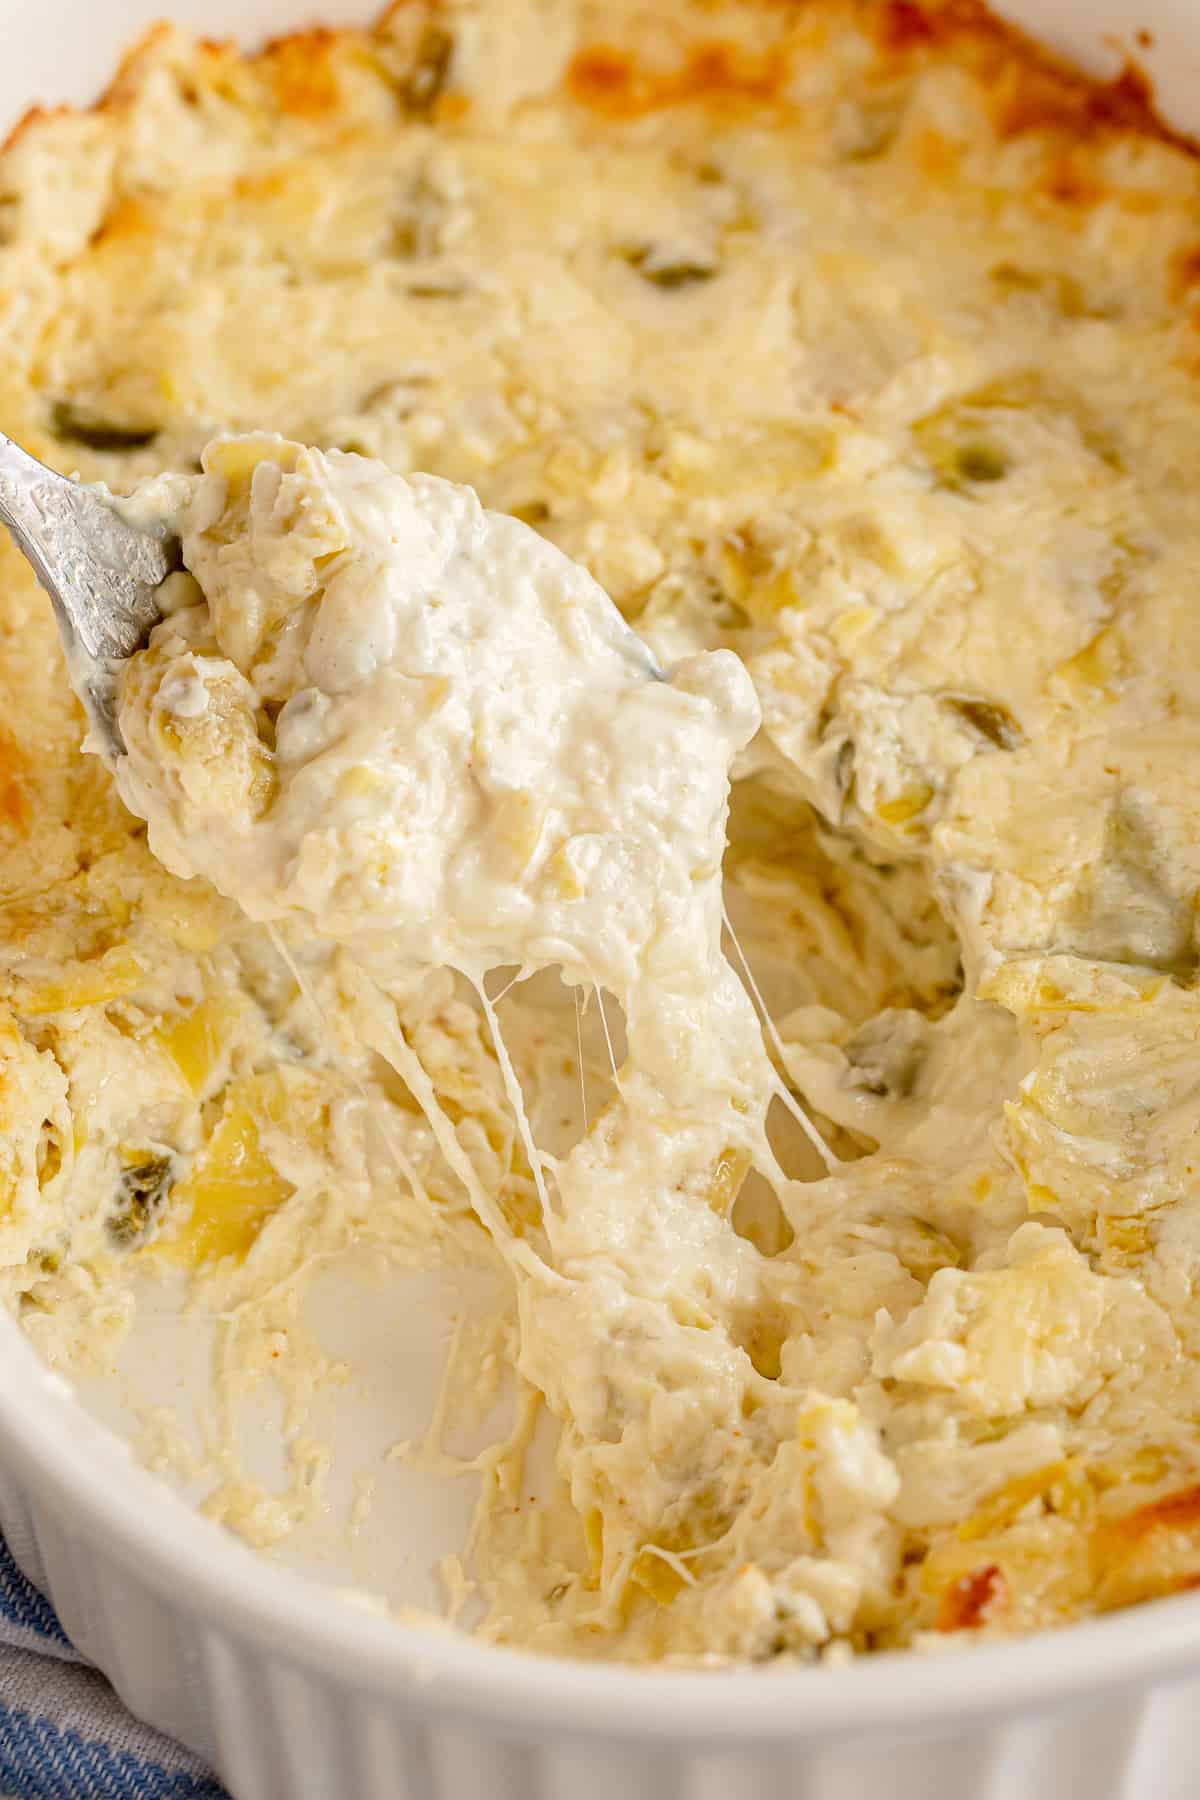 A spoon scoops cheesy dip from a baking dish.